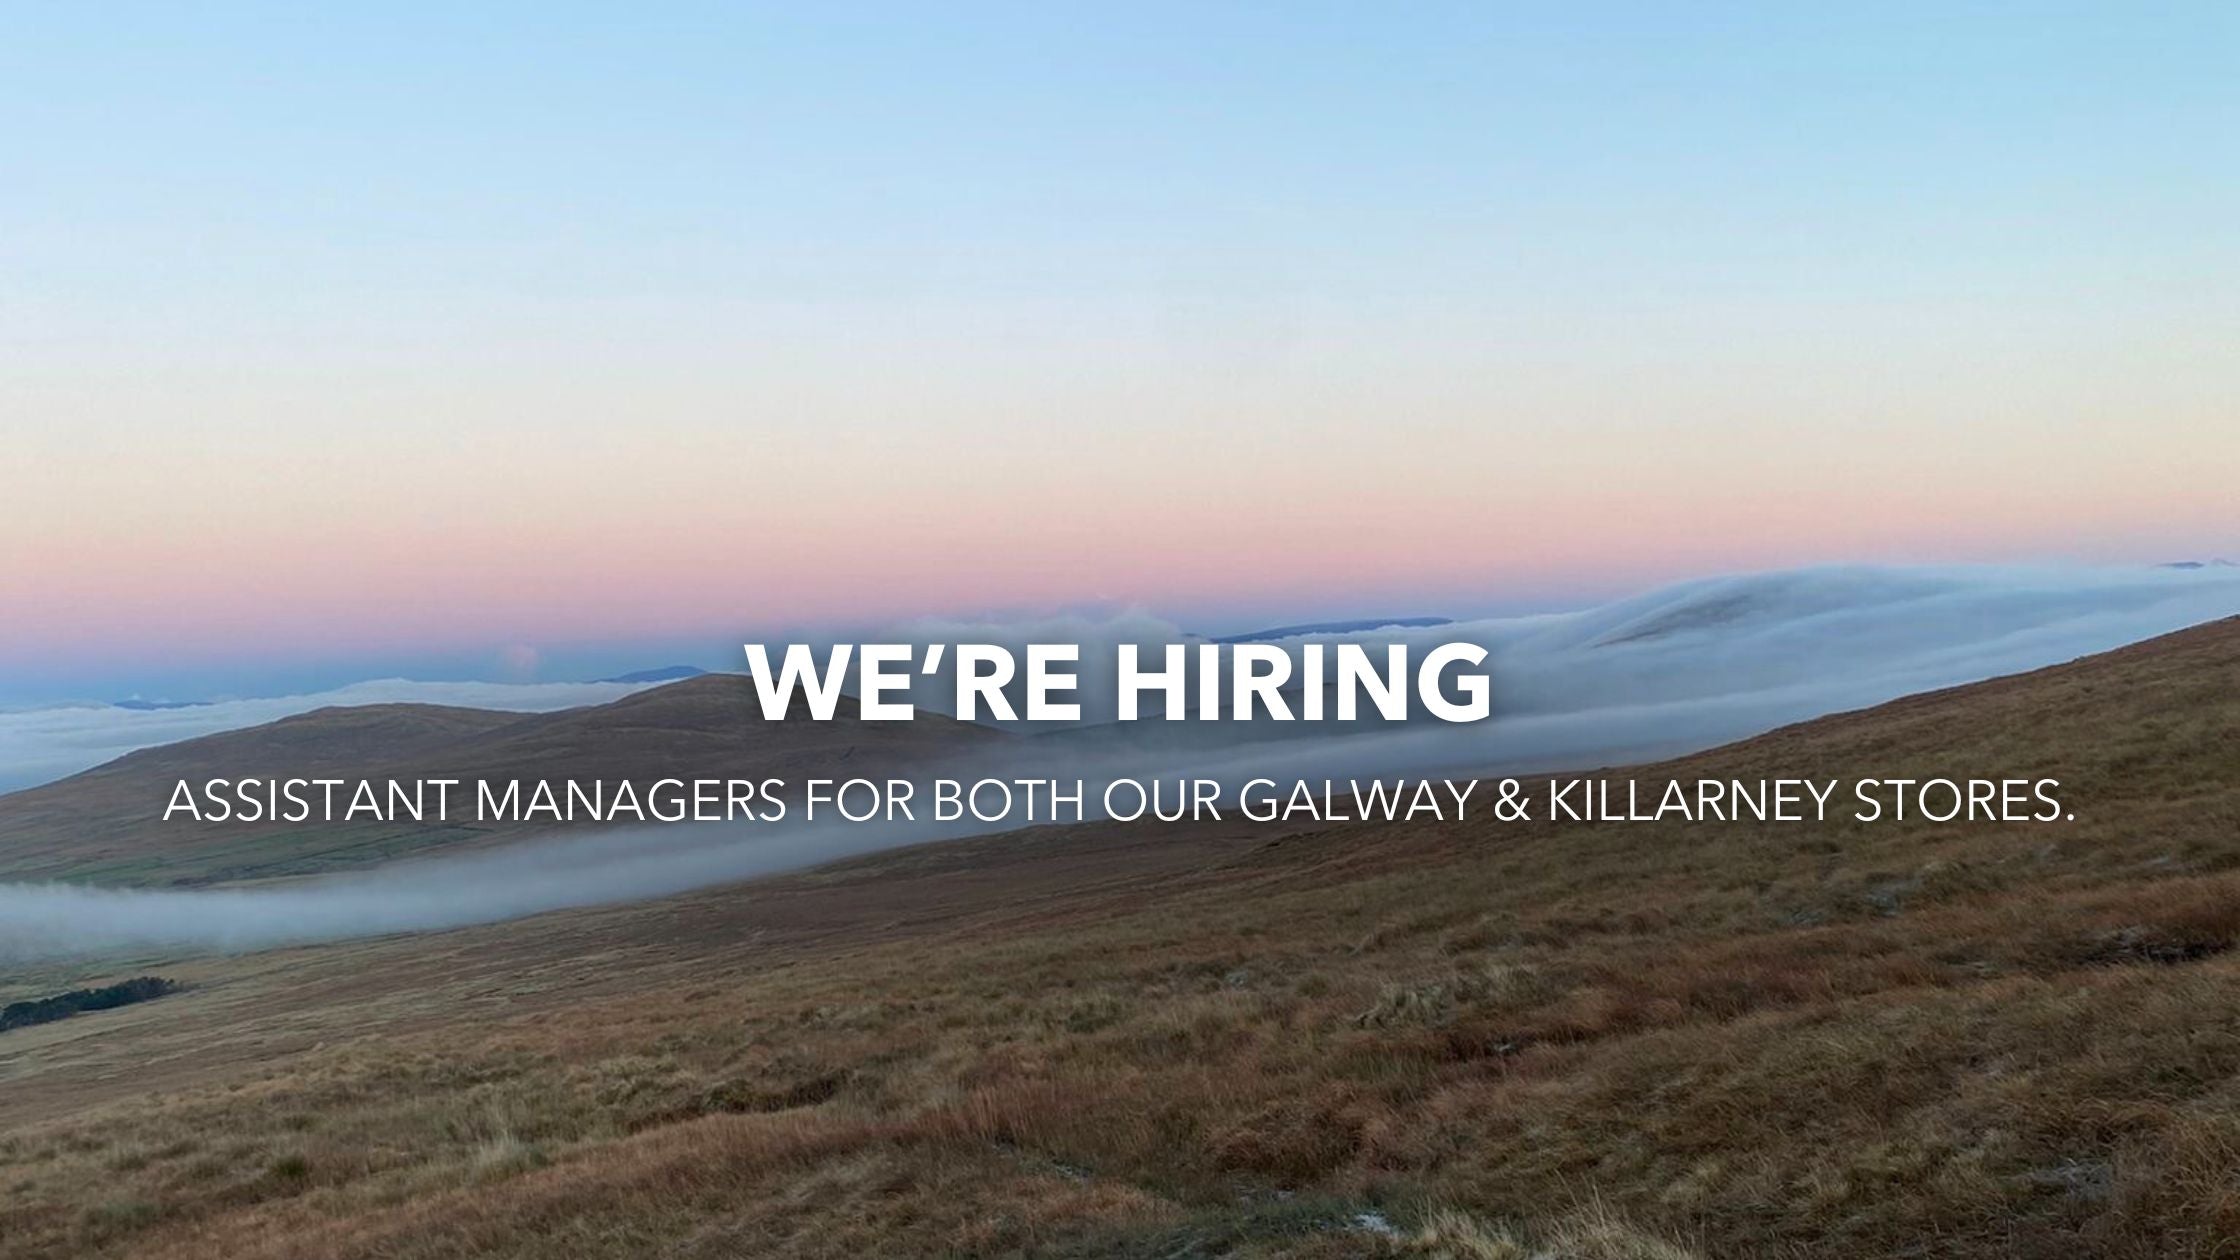 We're Hiring! Assistant Managers for both our Galway & Killarney Stores.